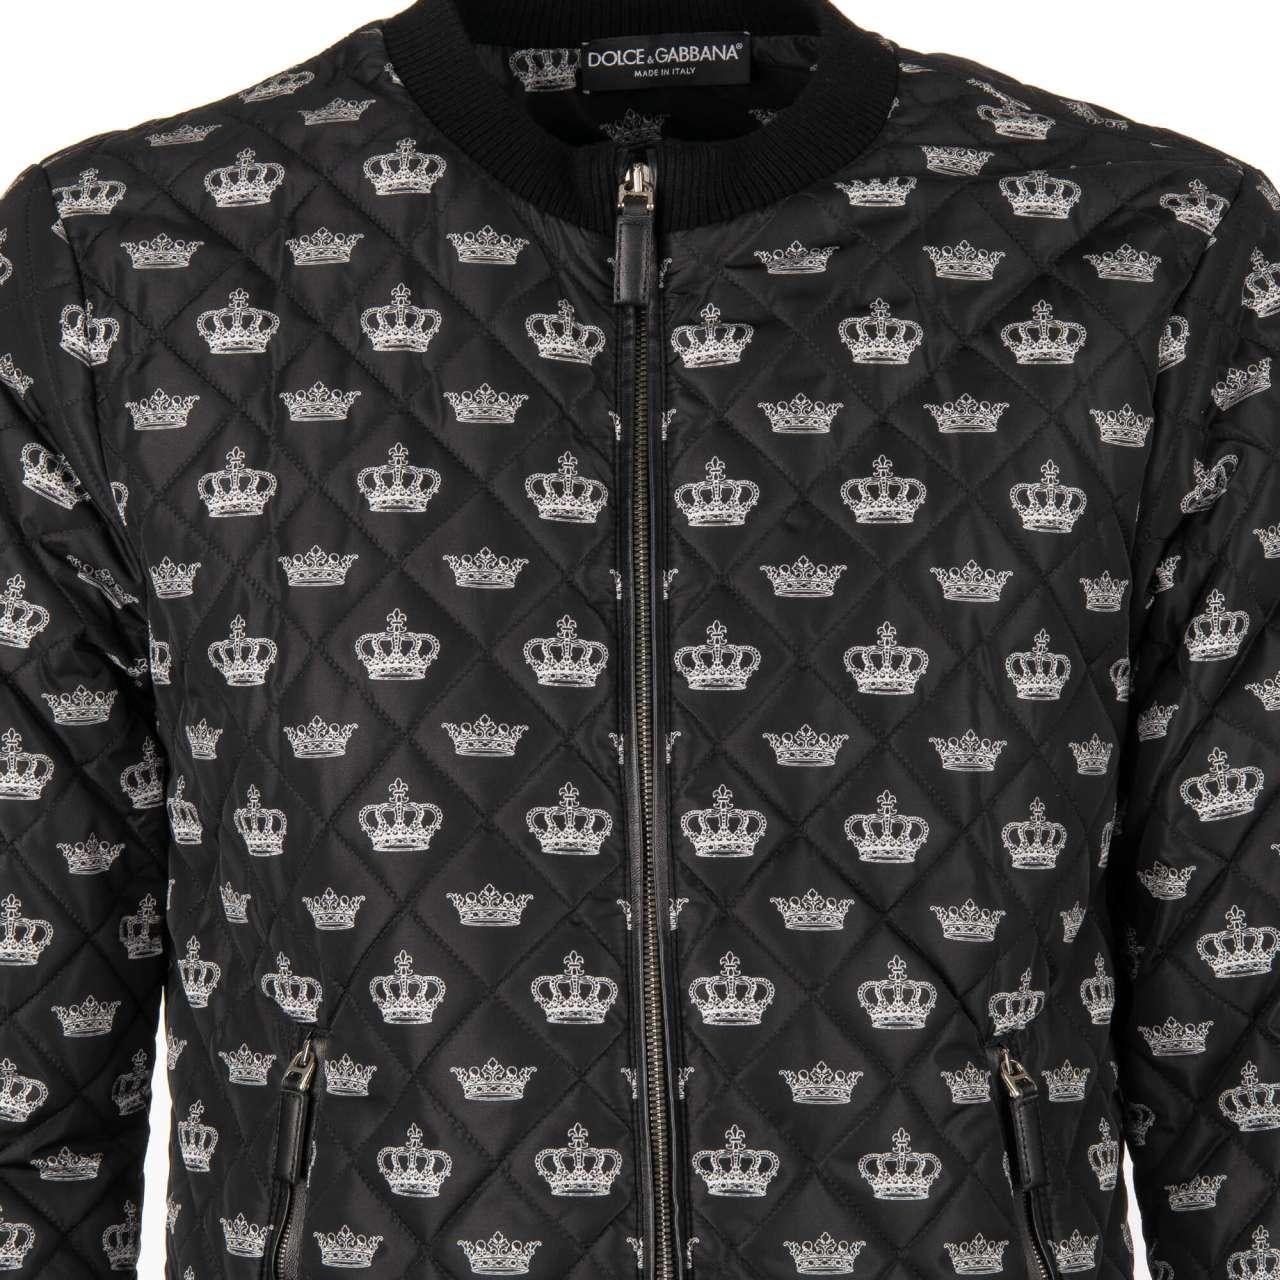 D&G Quilted Crowns Printed Bomber Jacket with Leather Details Black 46 In Excellent Condition For Sale In Erkrath, DE